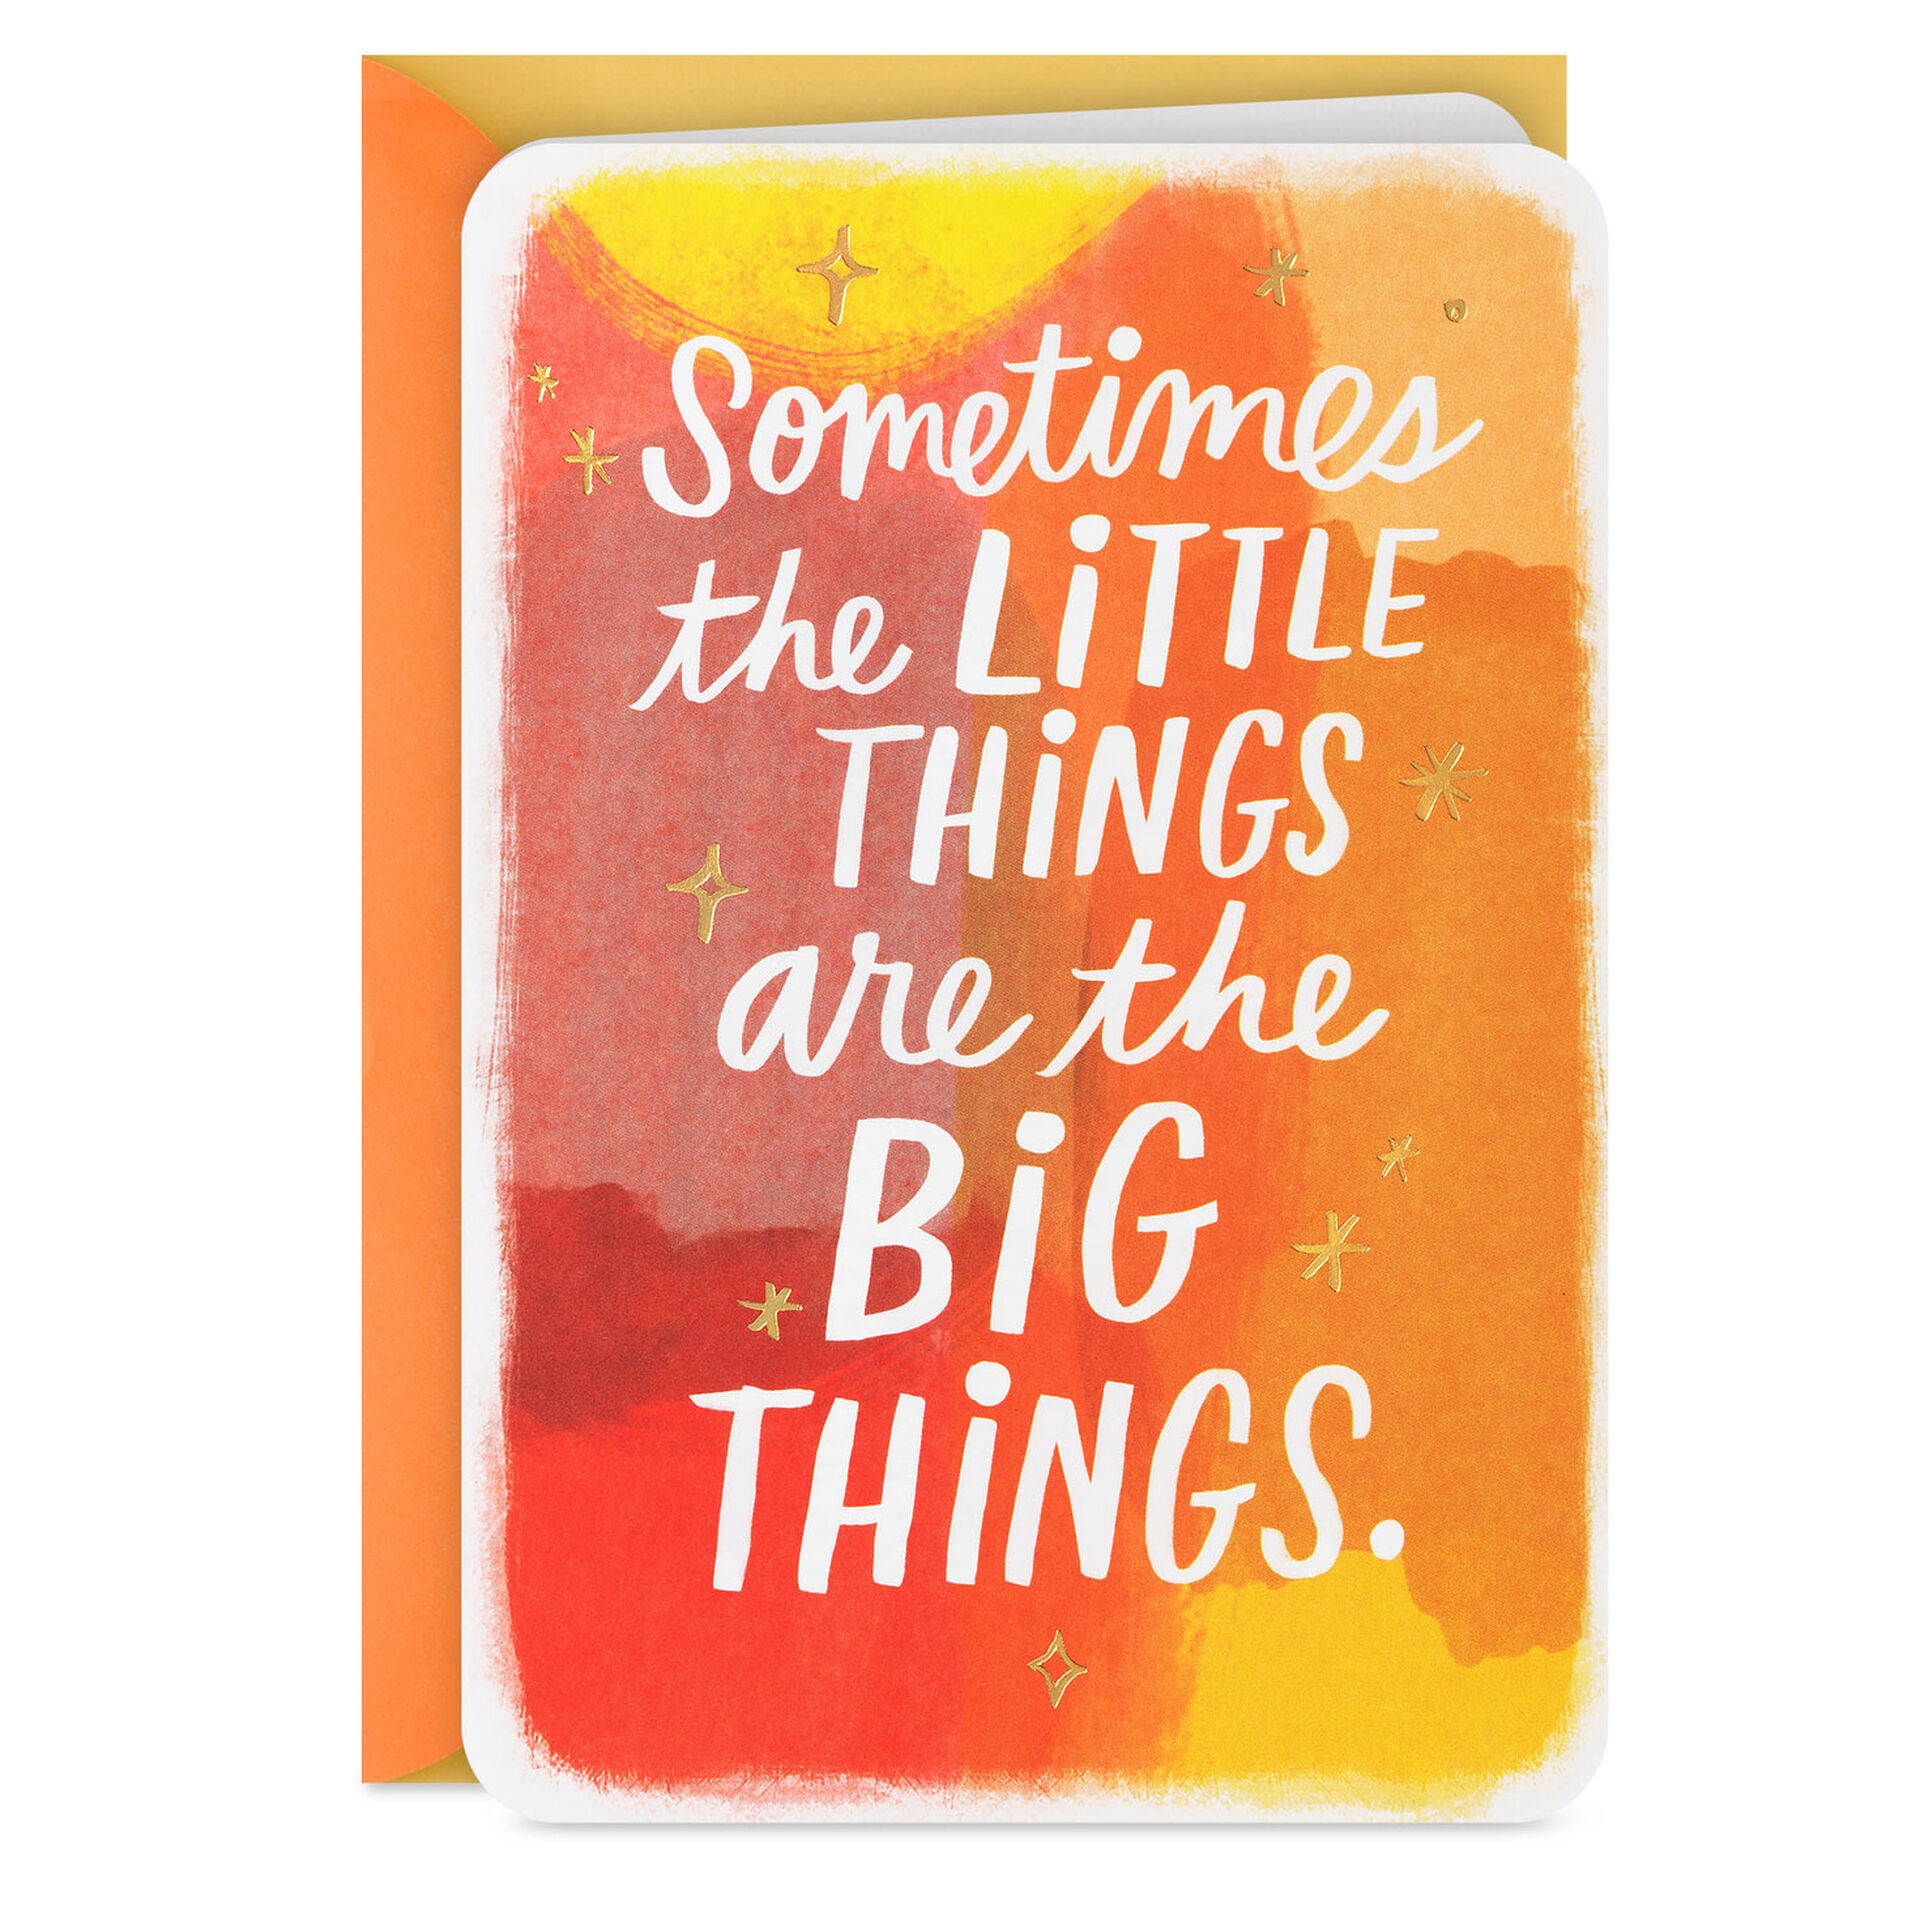 The-Little-Things-Abstract-Orange-and-Stars-Blank-Card_299RJB2005_01